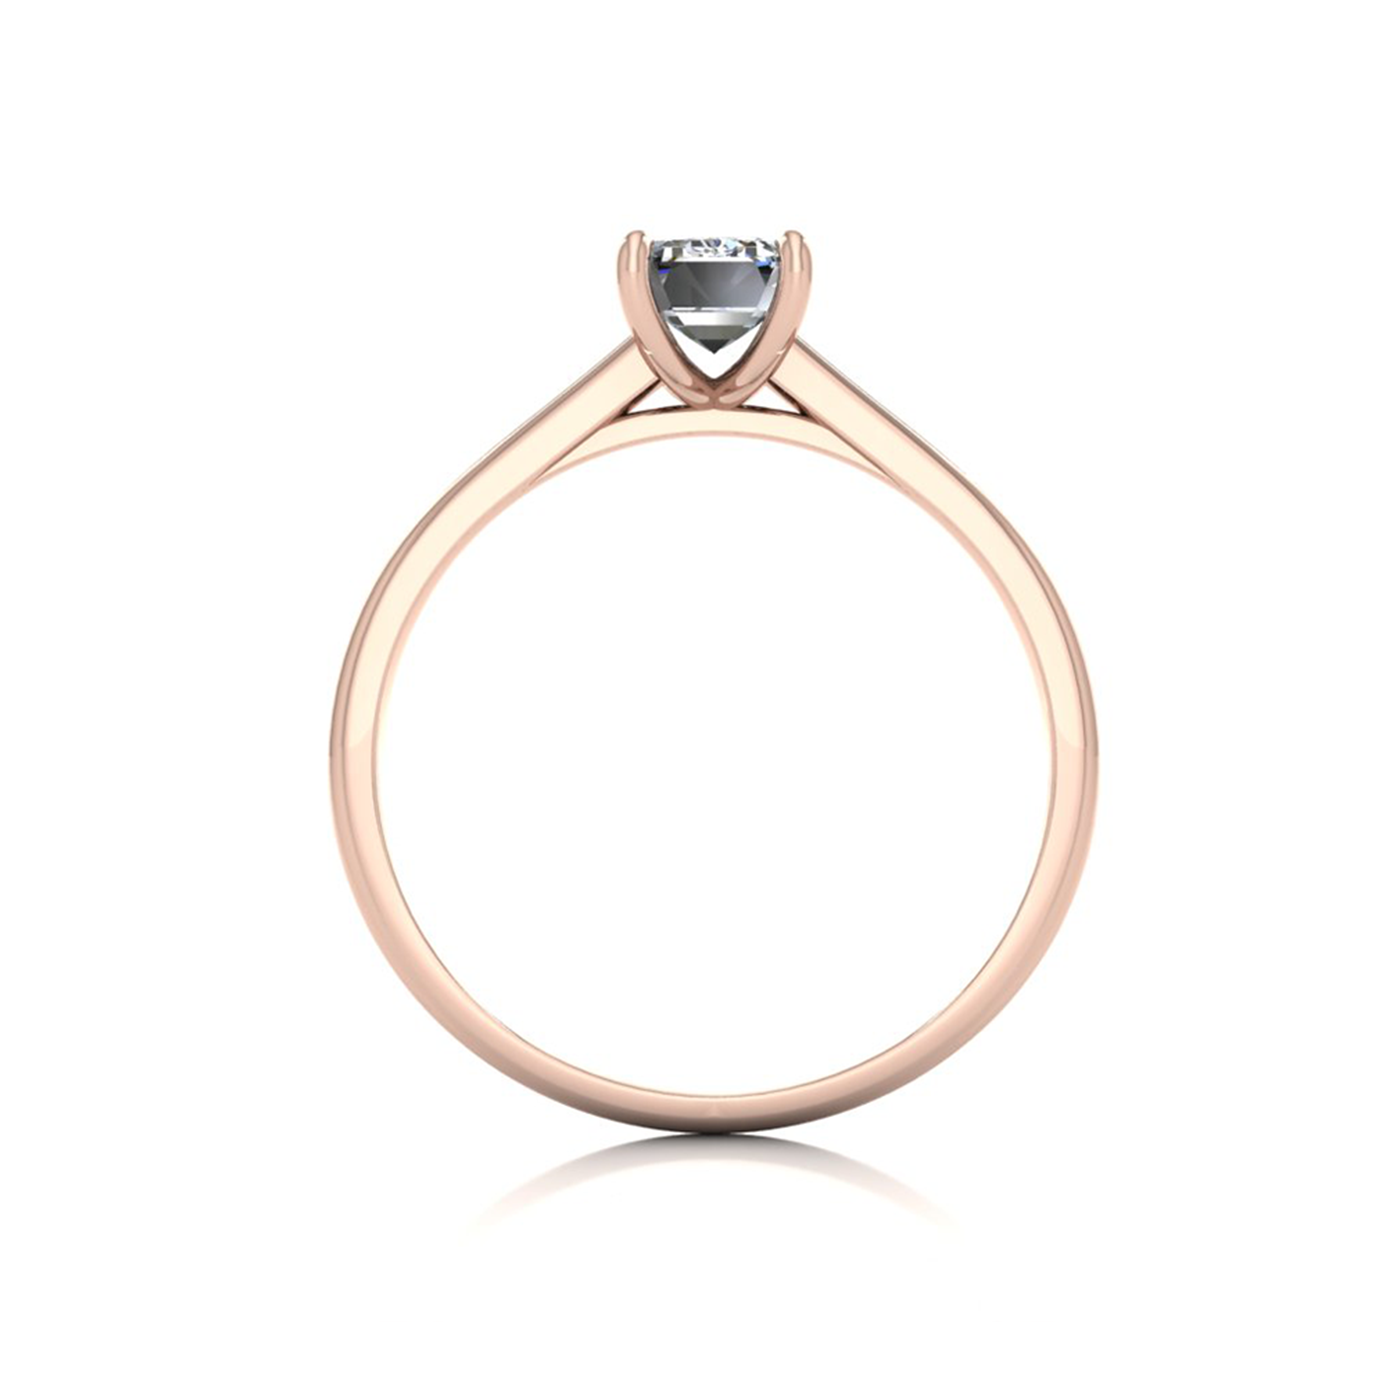 18k rose gold  0,80 ct 4 prongs solitaire emerald cut diamond engagement ring with whisper thin band